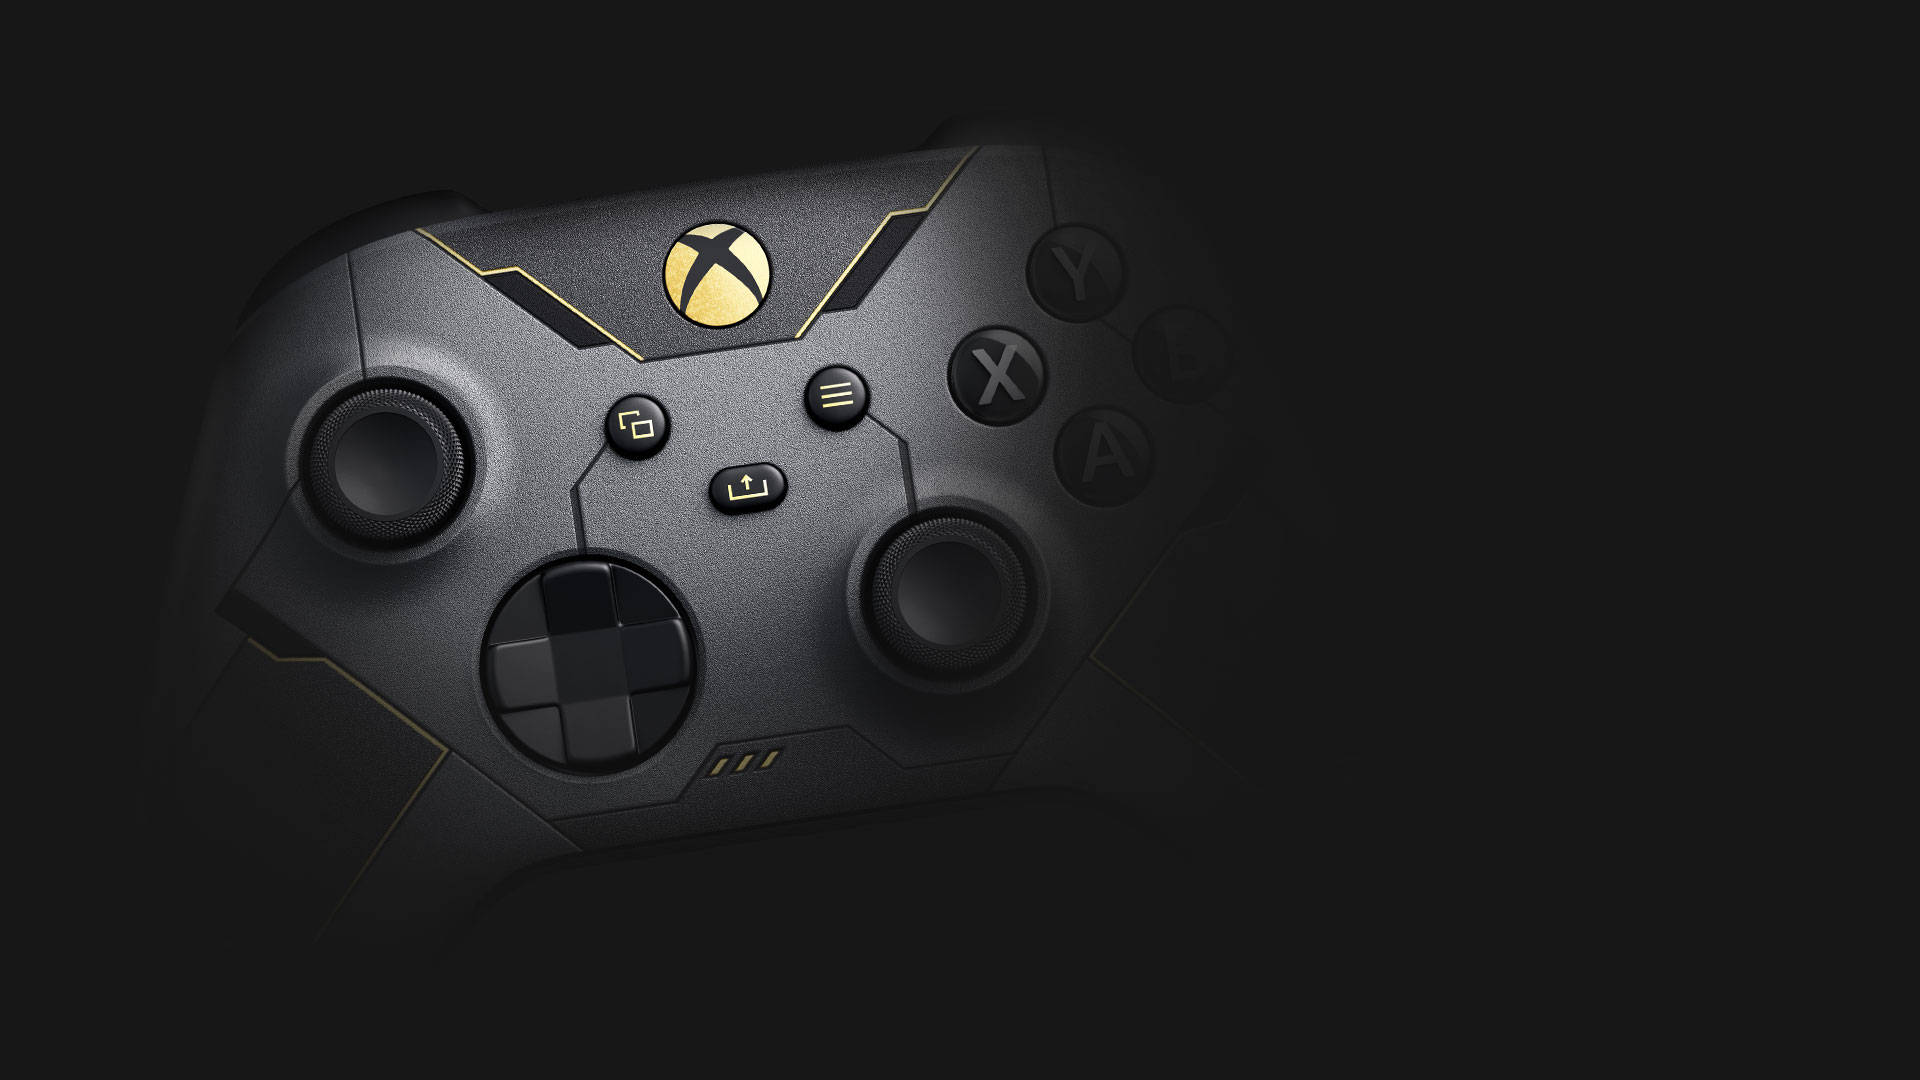 put forward Grudge manager Download Xbox Series X Halo Infinite Controller Wallpaper | Wallpapers.com